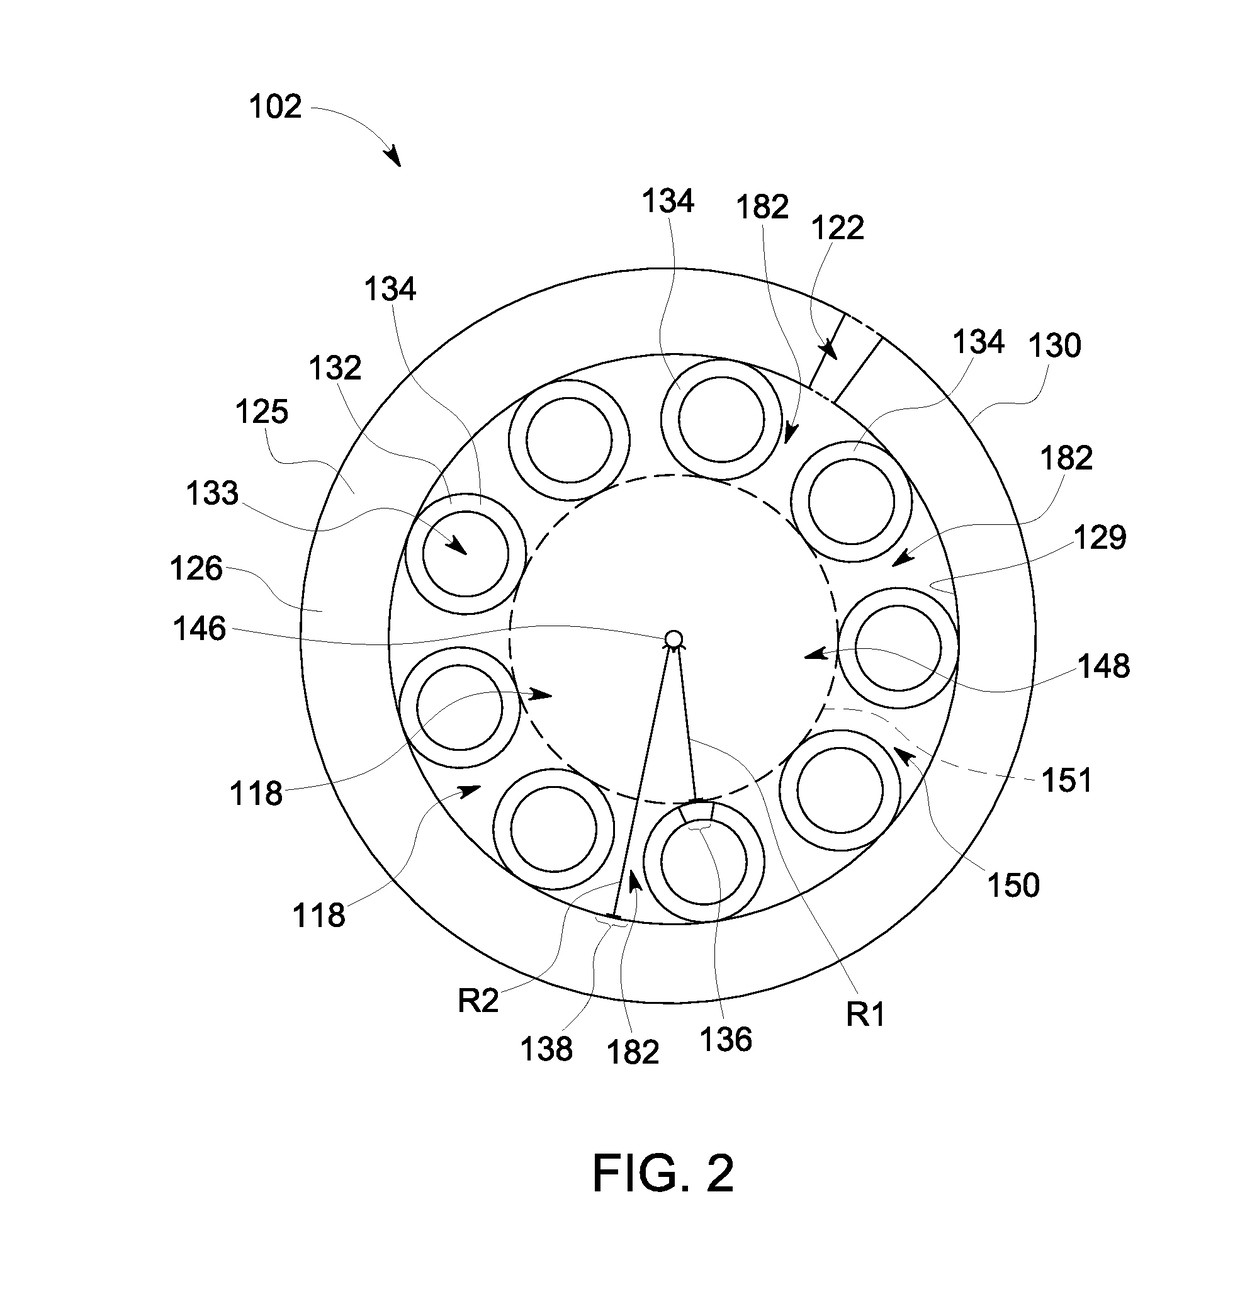 Microstructured optical fibers for gas sensing systems